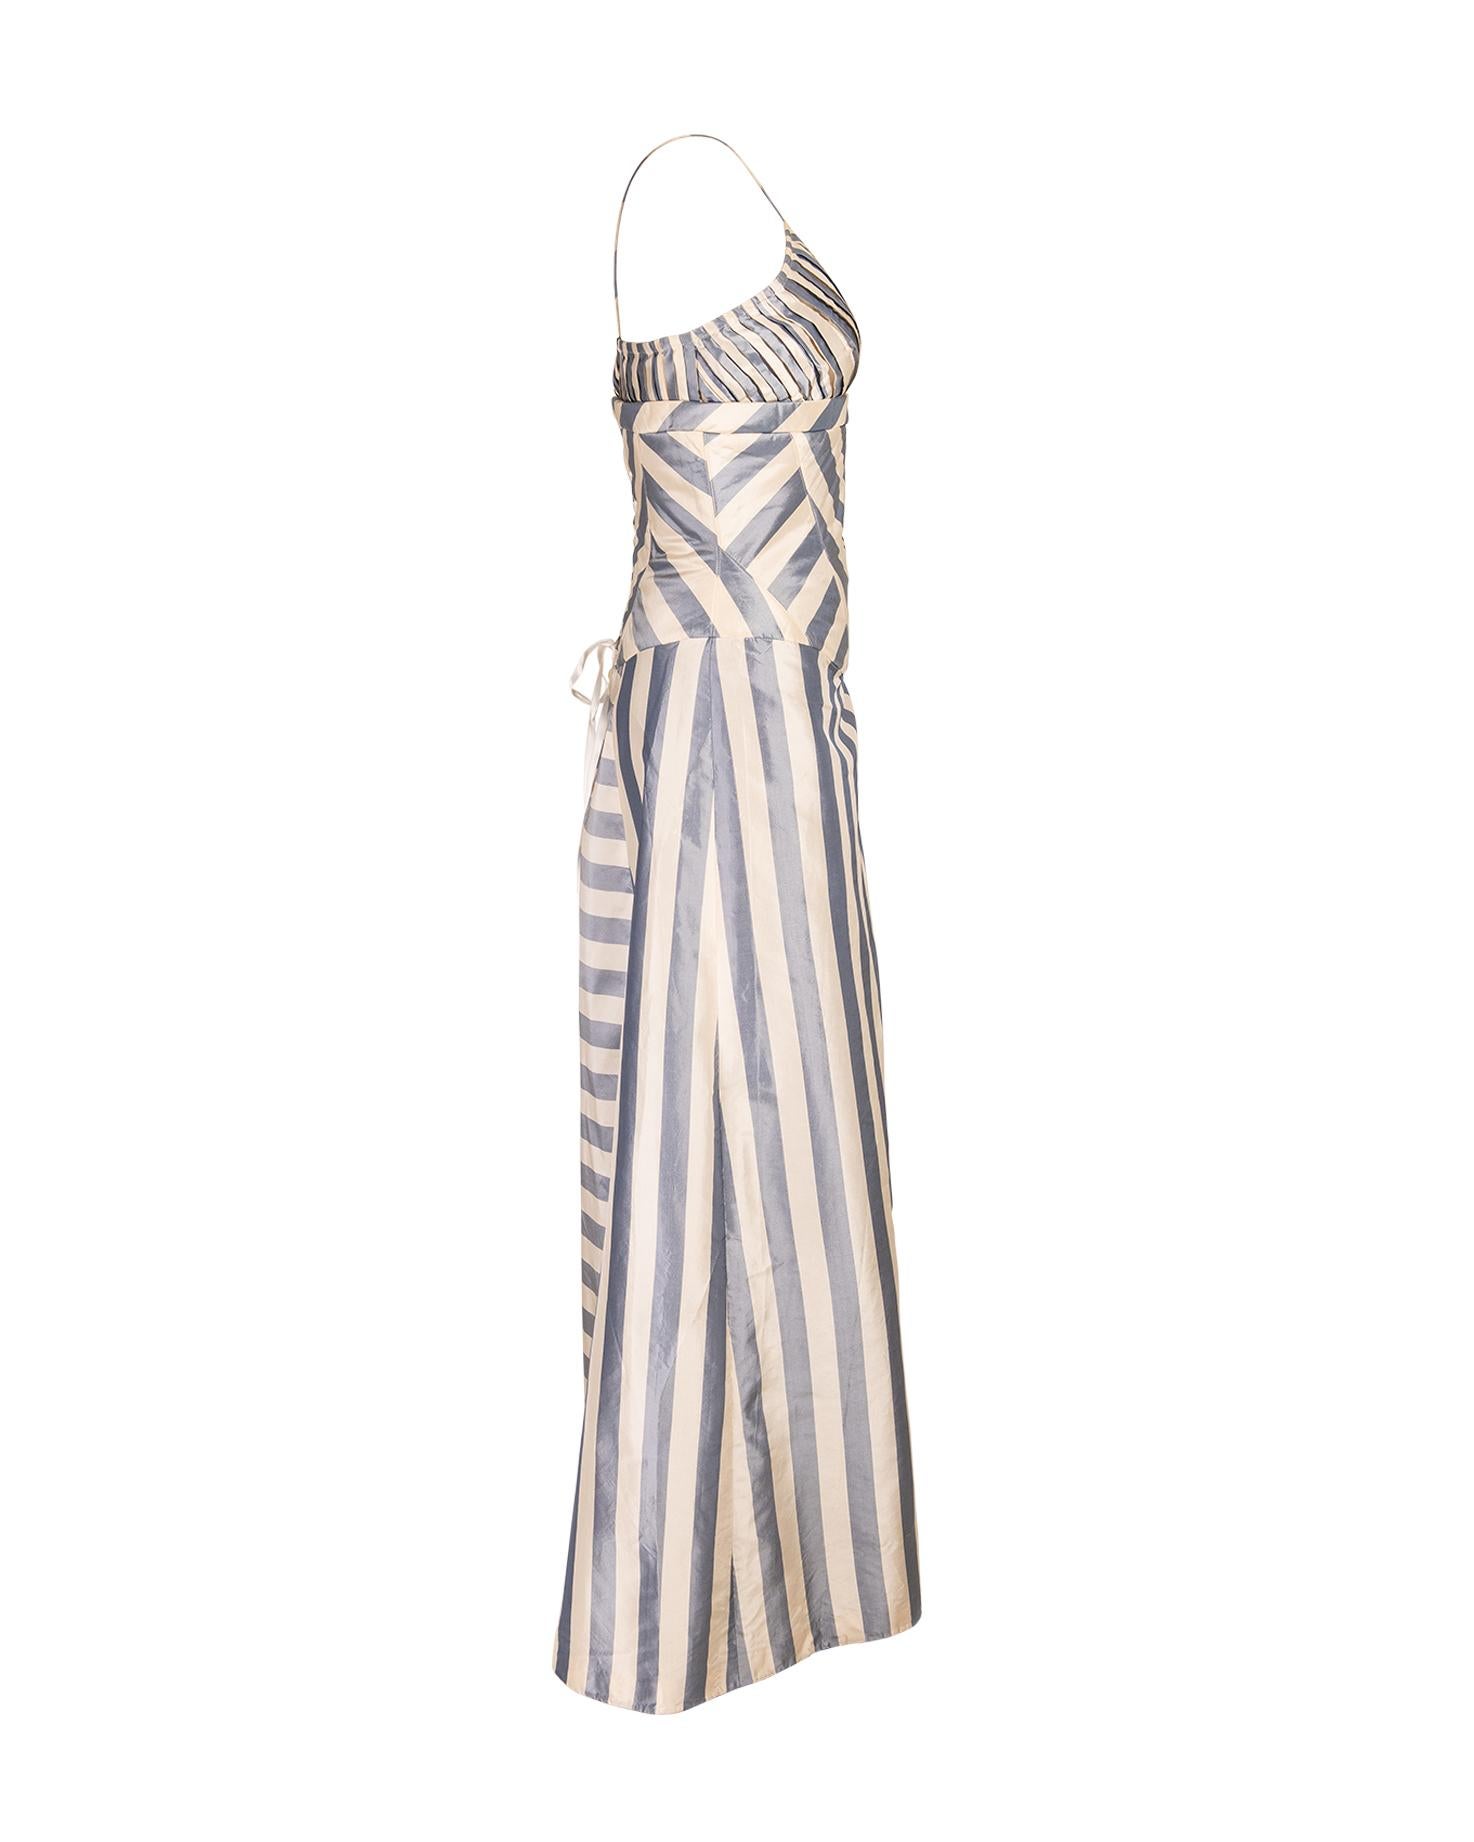 S/S 1998 Chloé by Stella McCartney Striped Silk Taffeta Corset Gown In Good Condition In North Hollywood, CA